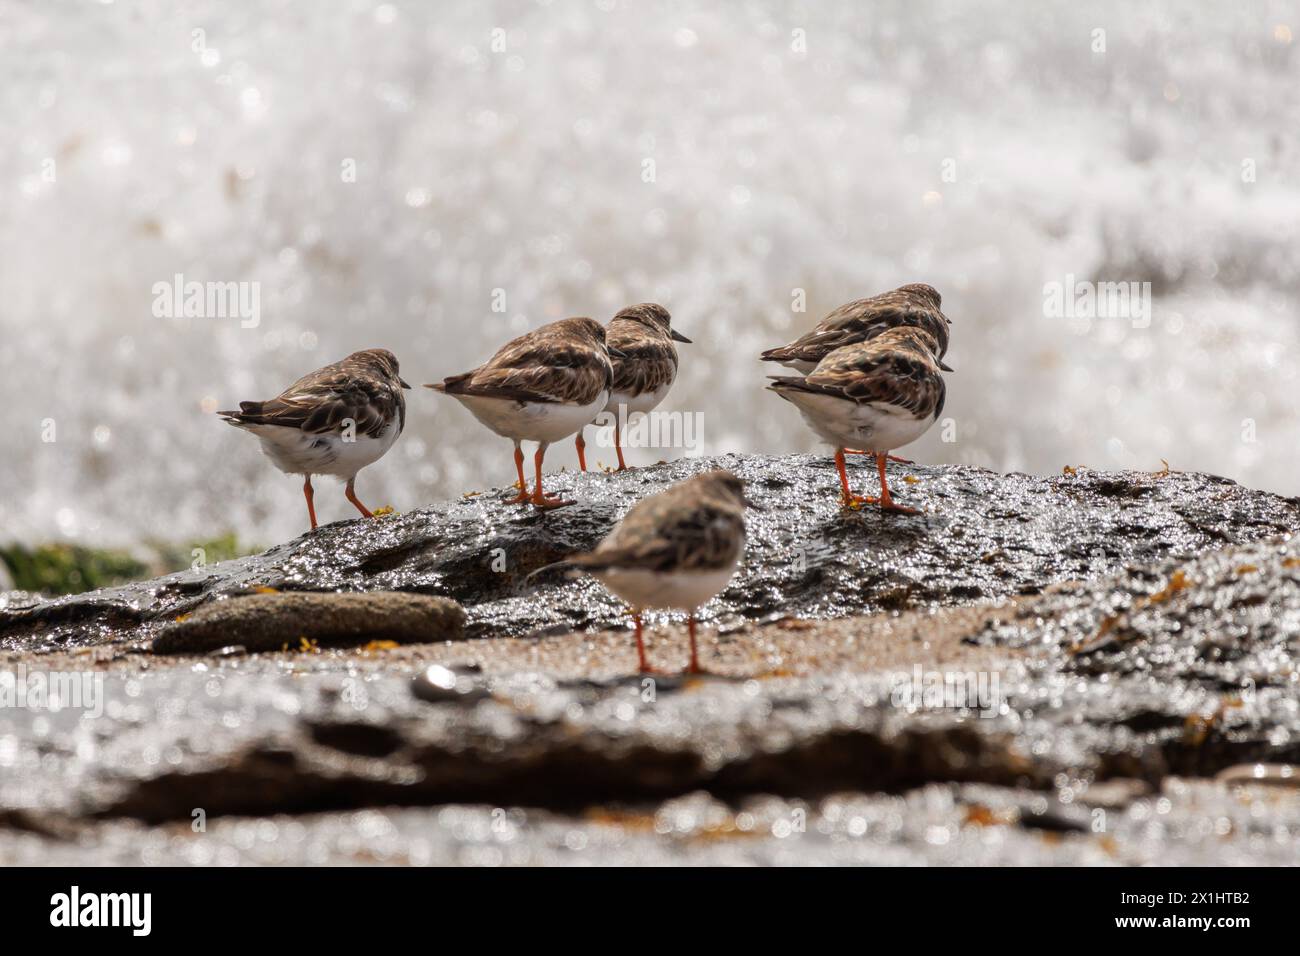 Group of Turnstones, Arenaria interpres, on rock in the Mediterranean Sea and wave breaking in the background, Spain Stock Photo